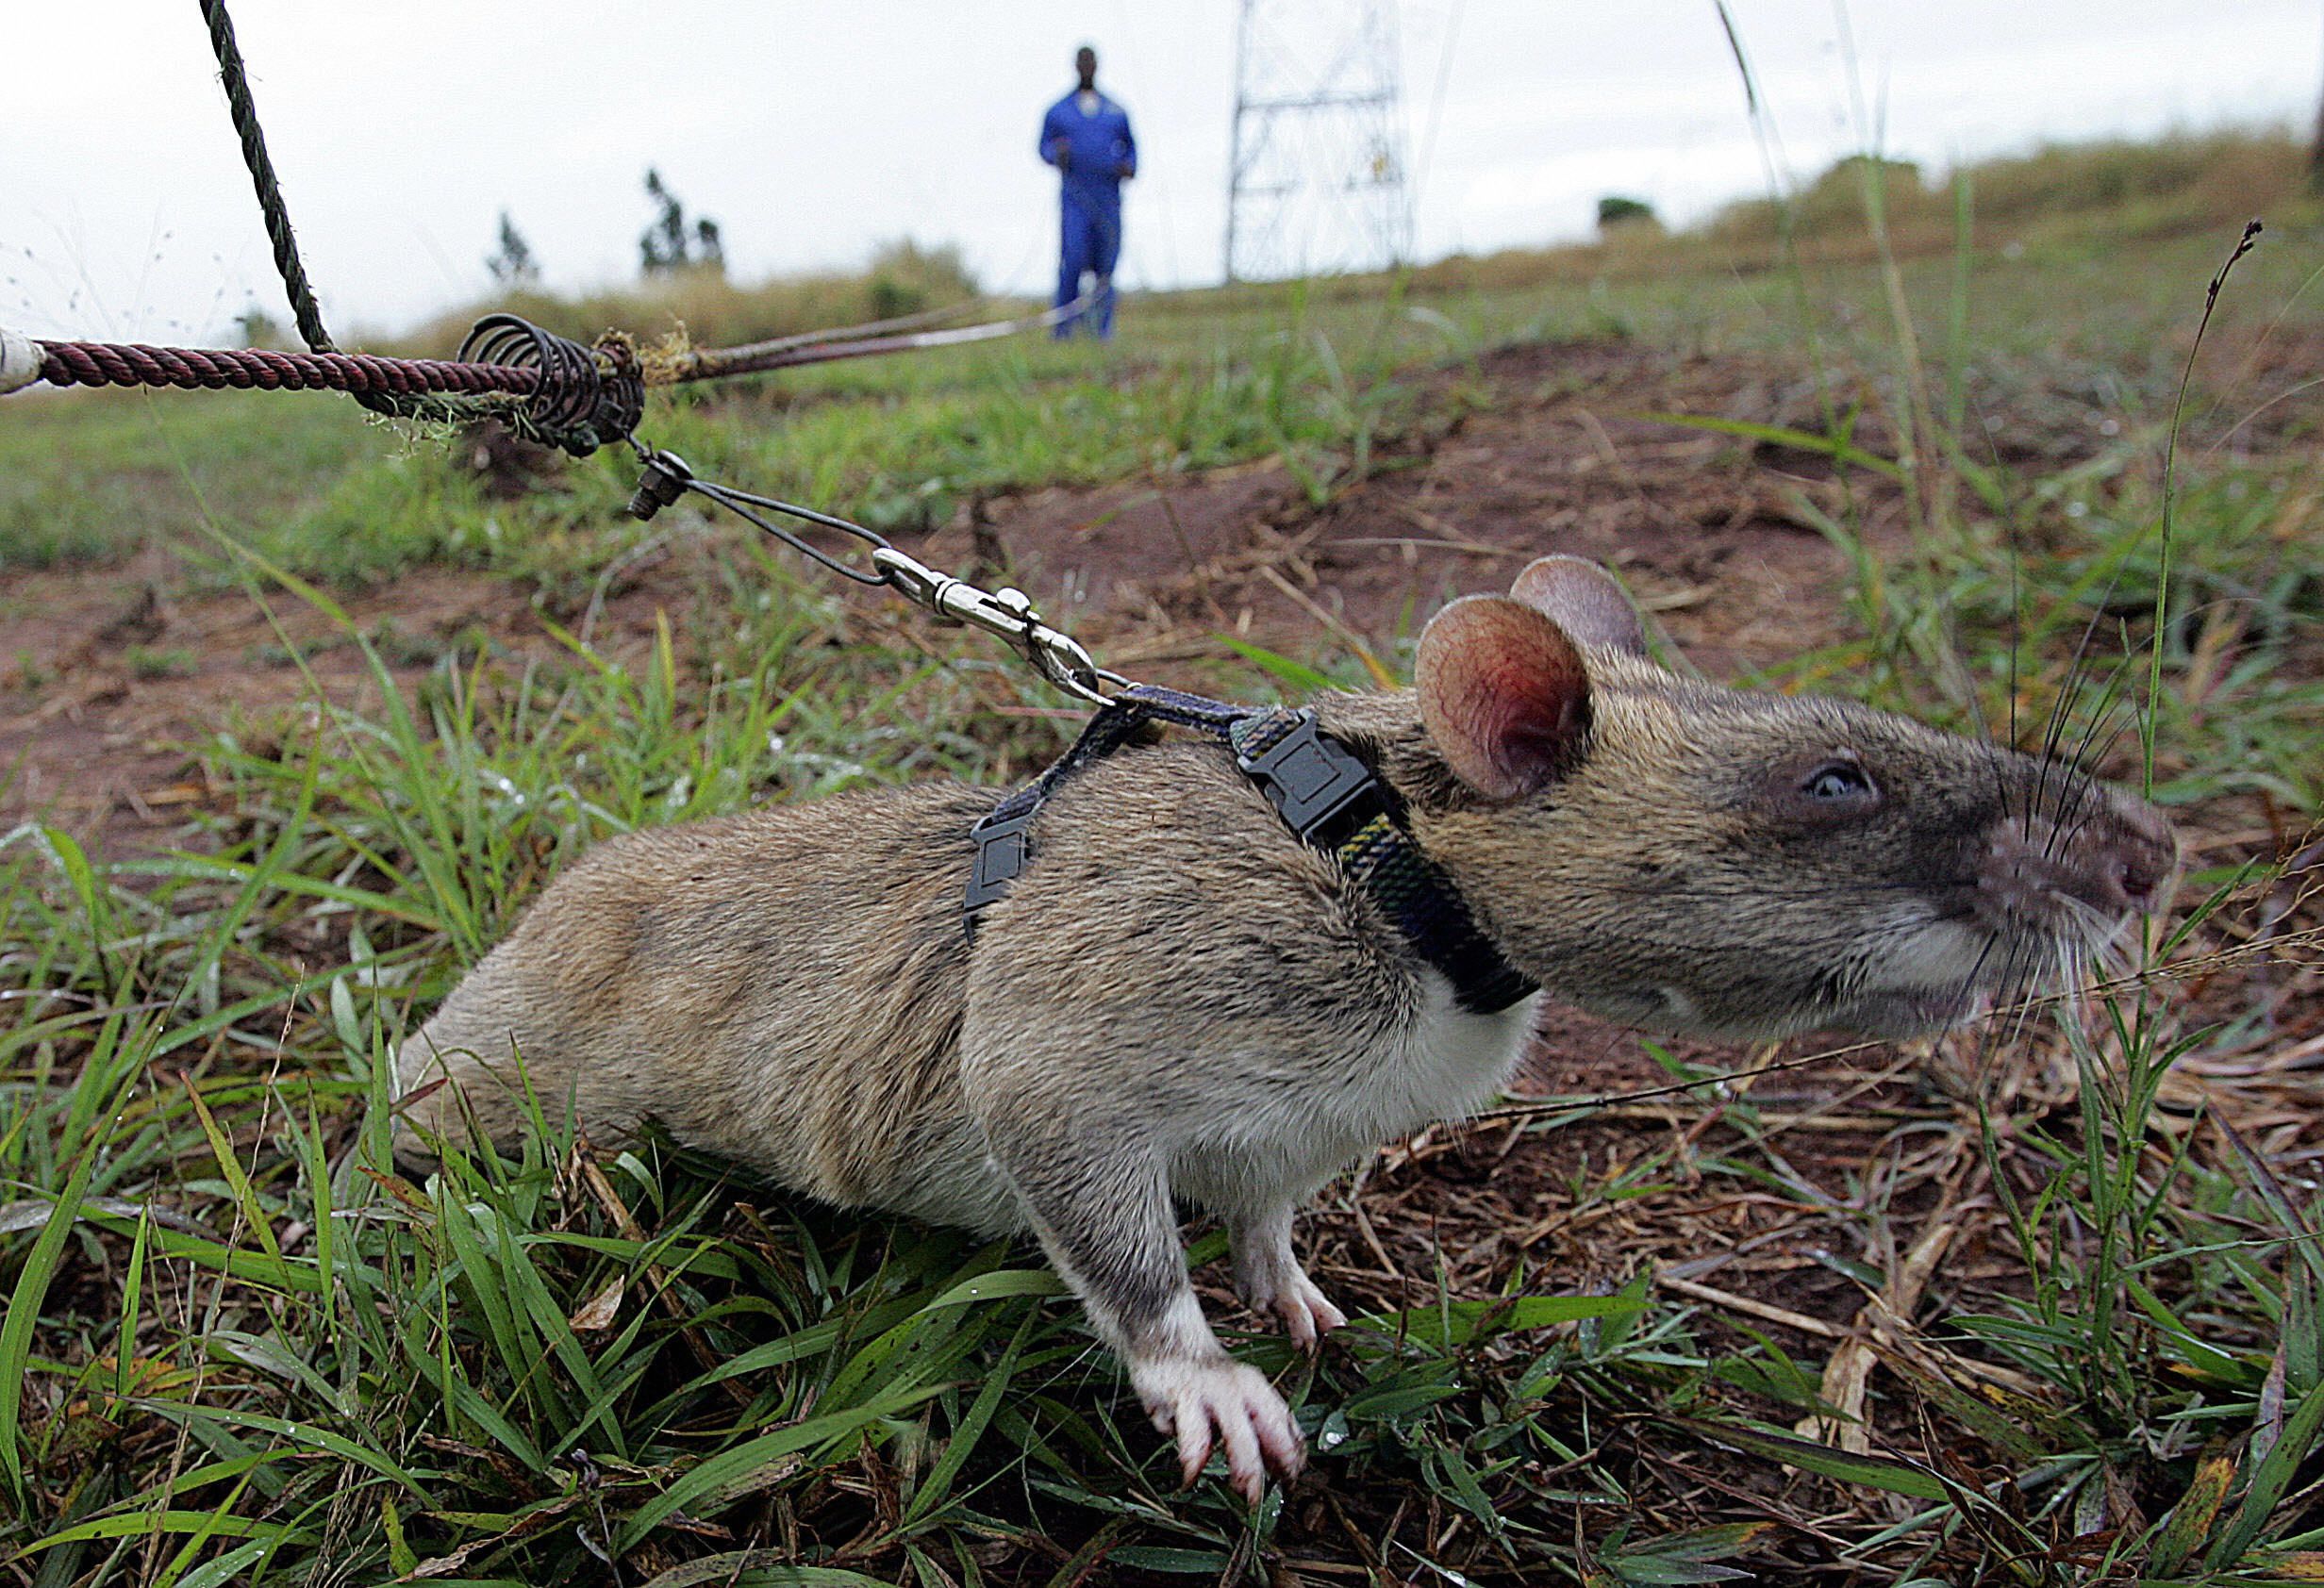 In neighboring Mozambique, African rats have helped sniff out land mines since the end of the country's brutal civil war. Trained by a <a href="index.php?page=&url=http%3A%2F%2Fedition.cnn.com%2F2010%2FWORLD%2Fafrica%2F09%2F07%2Fherorats.detect.landmines%2Findex.html" target="_blank">Belgian de-mining research team</a>, the animals have a keen sense of smell and acquire their skills easily.